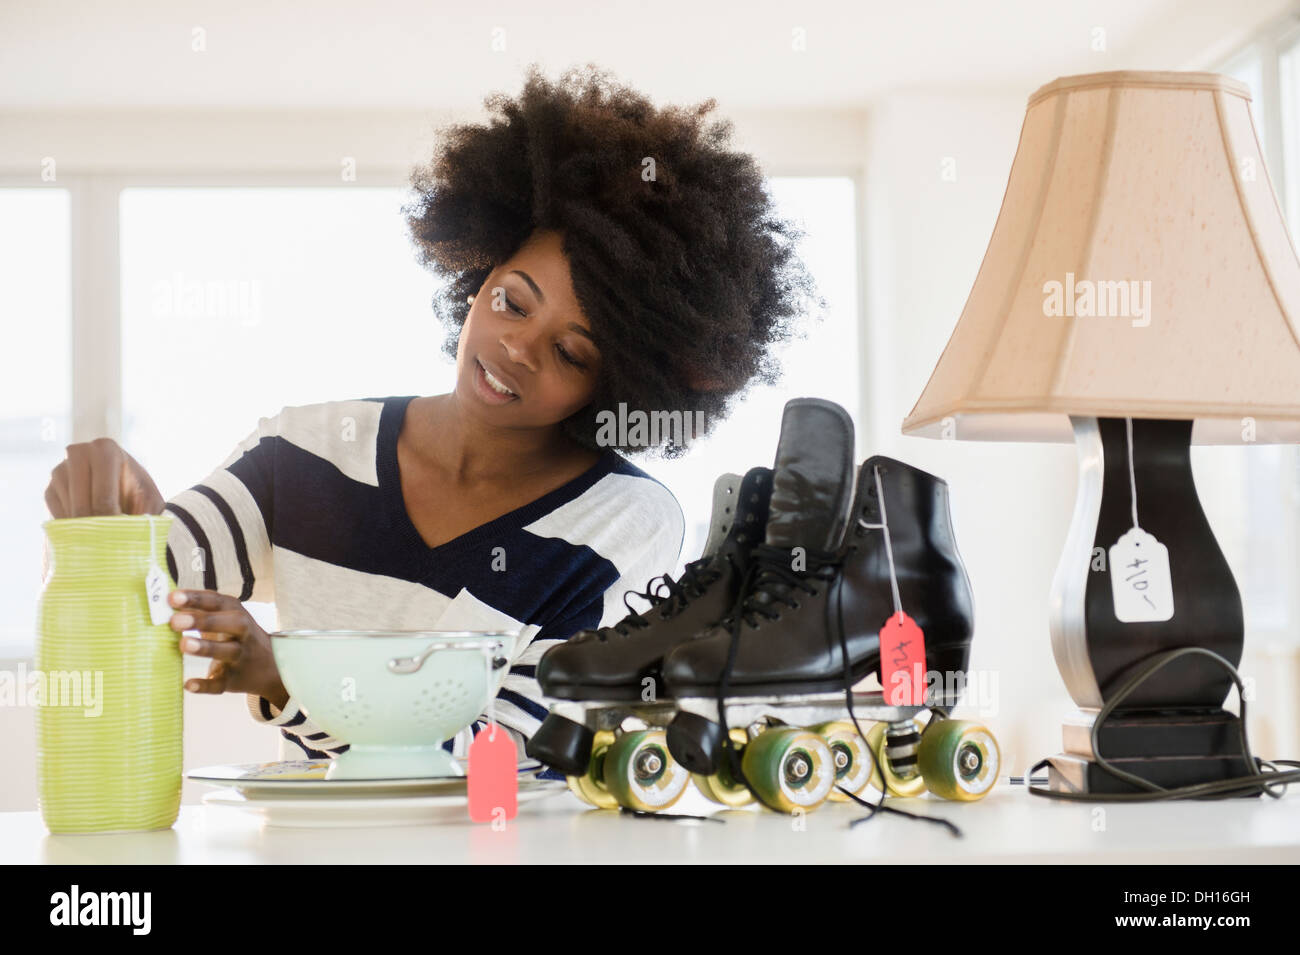 Mixed race woman putting price tag on items Stock Photo